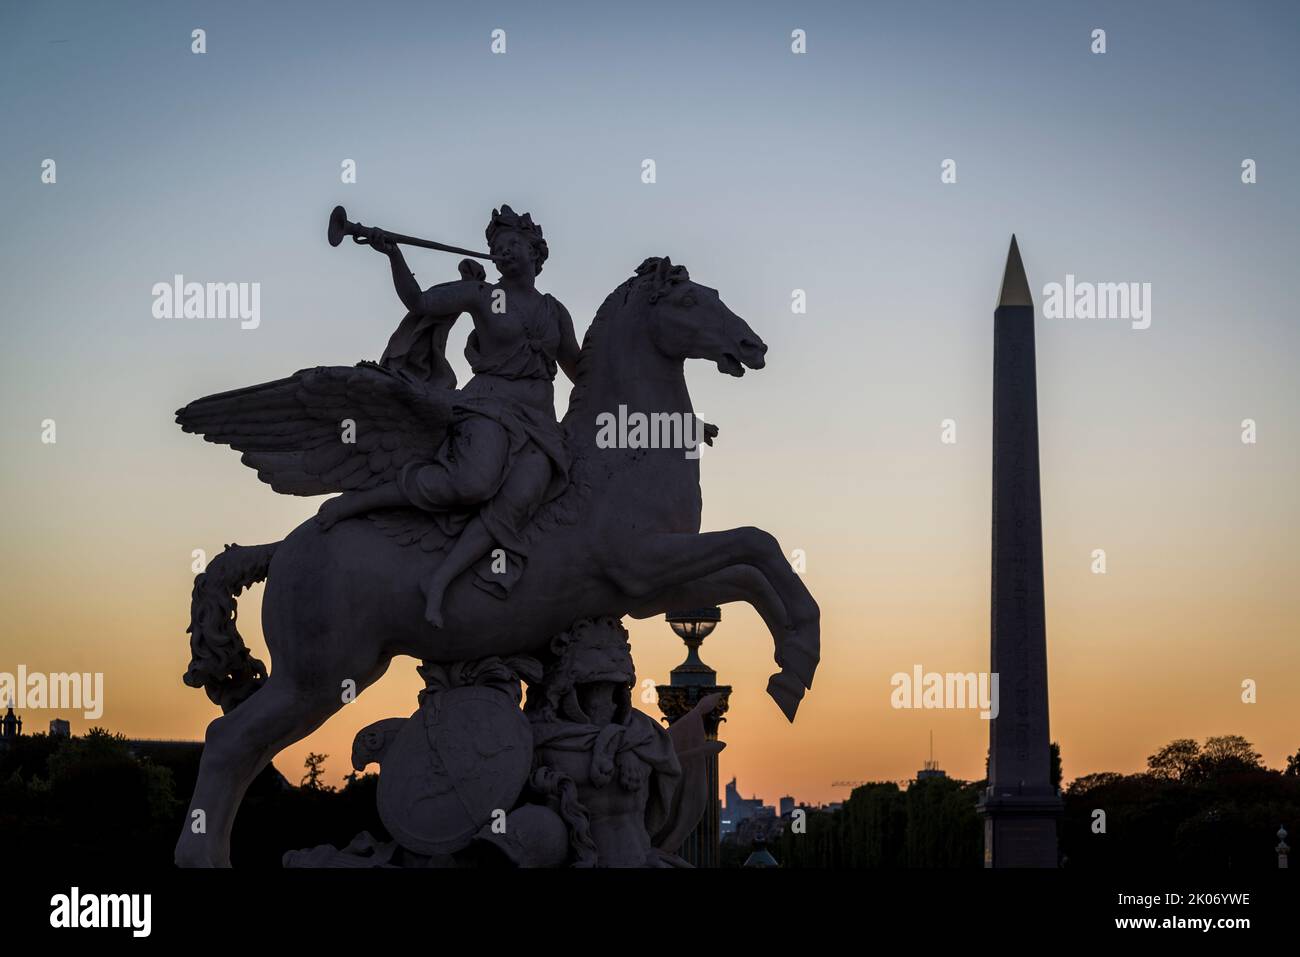 Detail of Place de la Concorde, Major public square, scene of executions, decorated with statues & an Egyptian obelisk at sunset, Paris, France Stock Photo